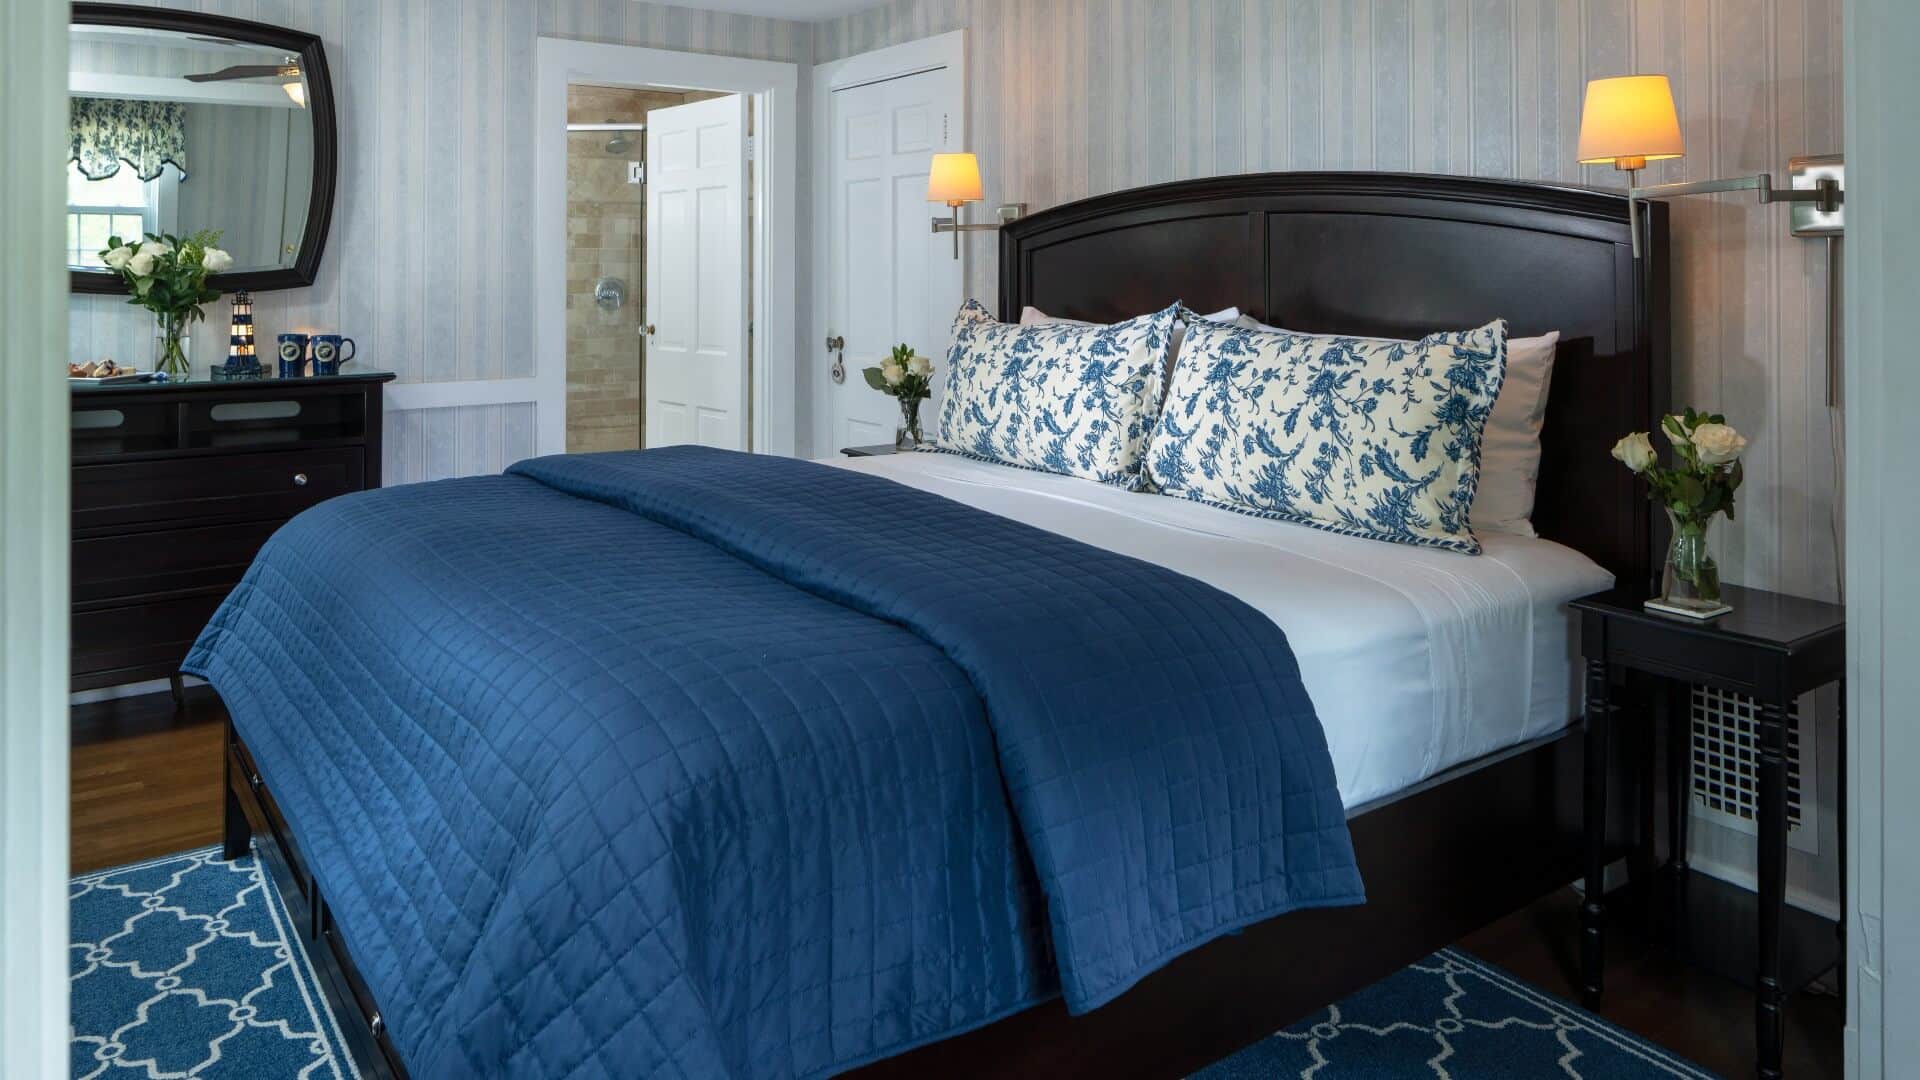 Elegant bedroom in blue hues with king bed, dresser with mirror and doorway into attached bathroom